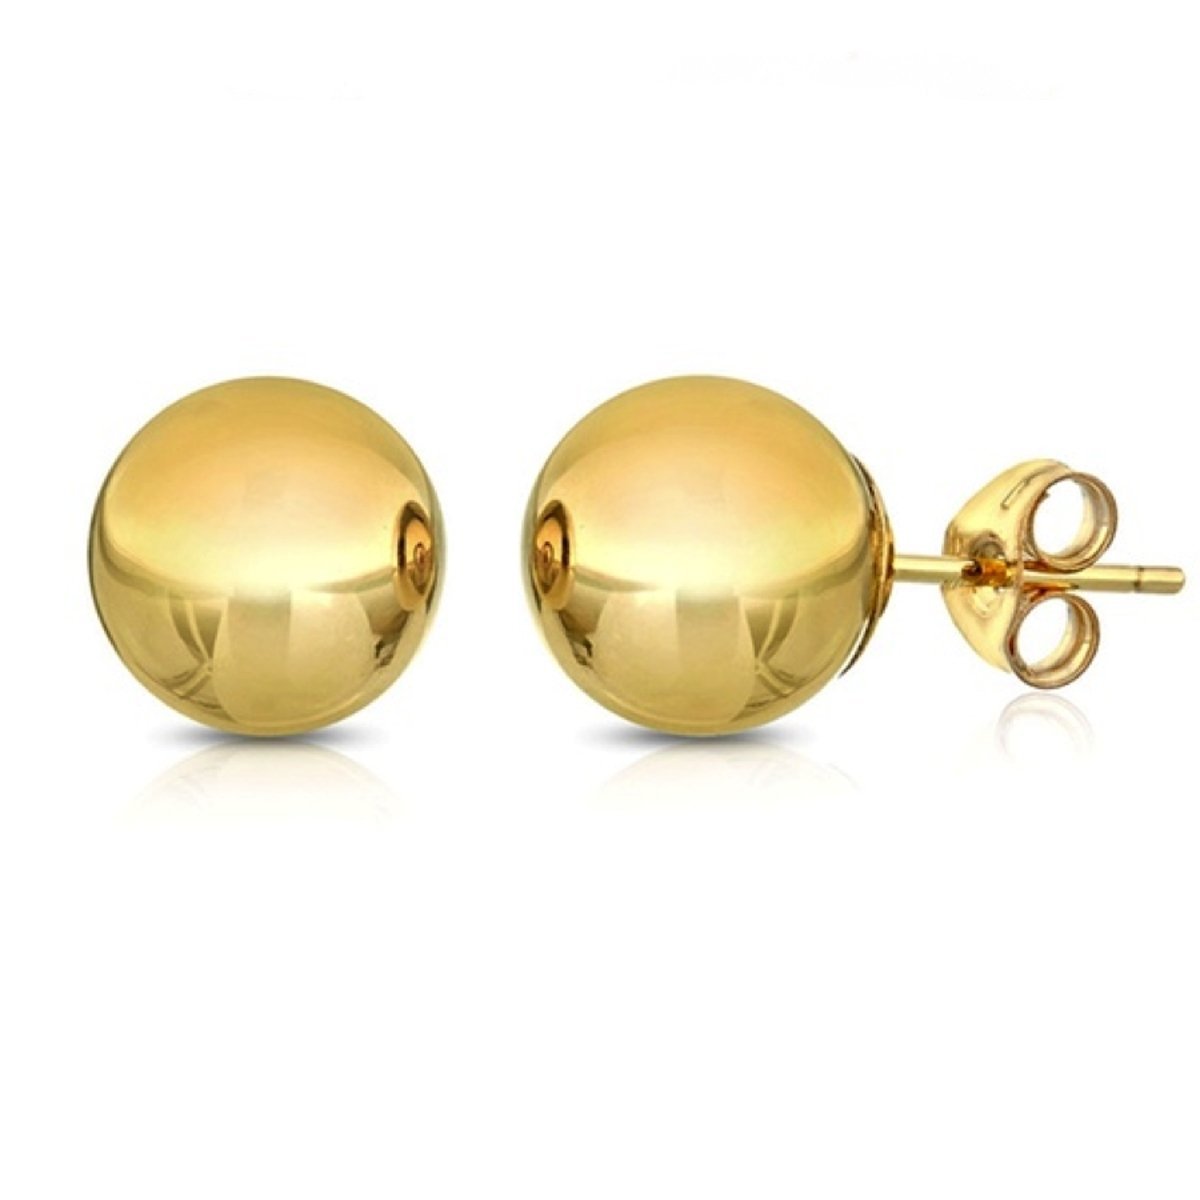 Picture of Alily Jewelry HAI-E073-GOLD 6 mm Classic Ball Stud Earring in 14K Gold Plated